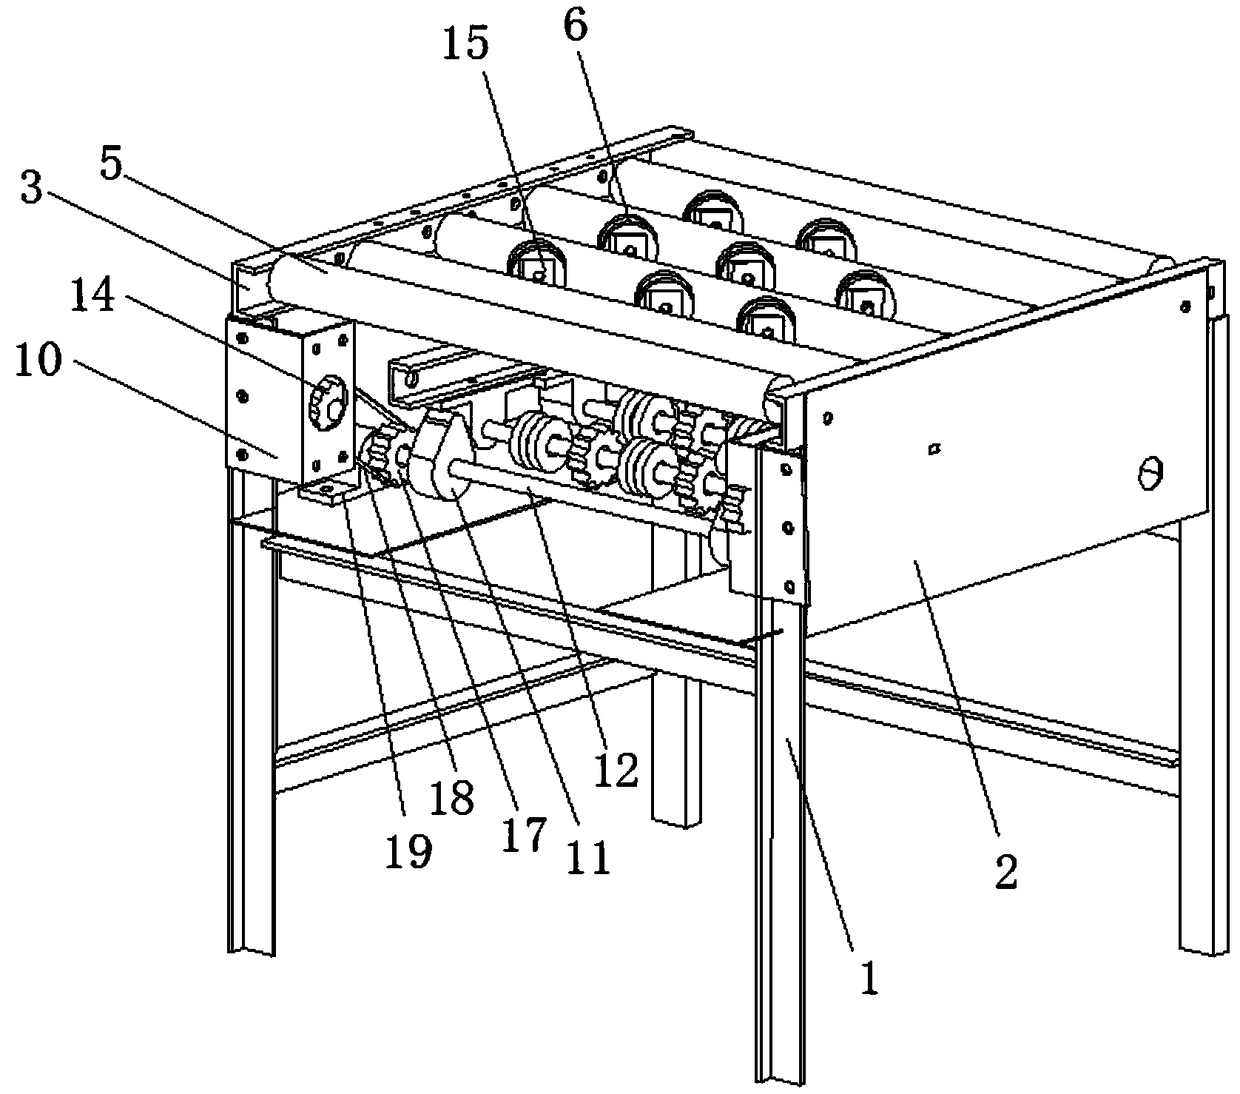 Mail automatic sorting device